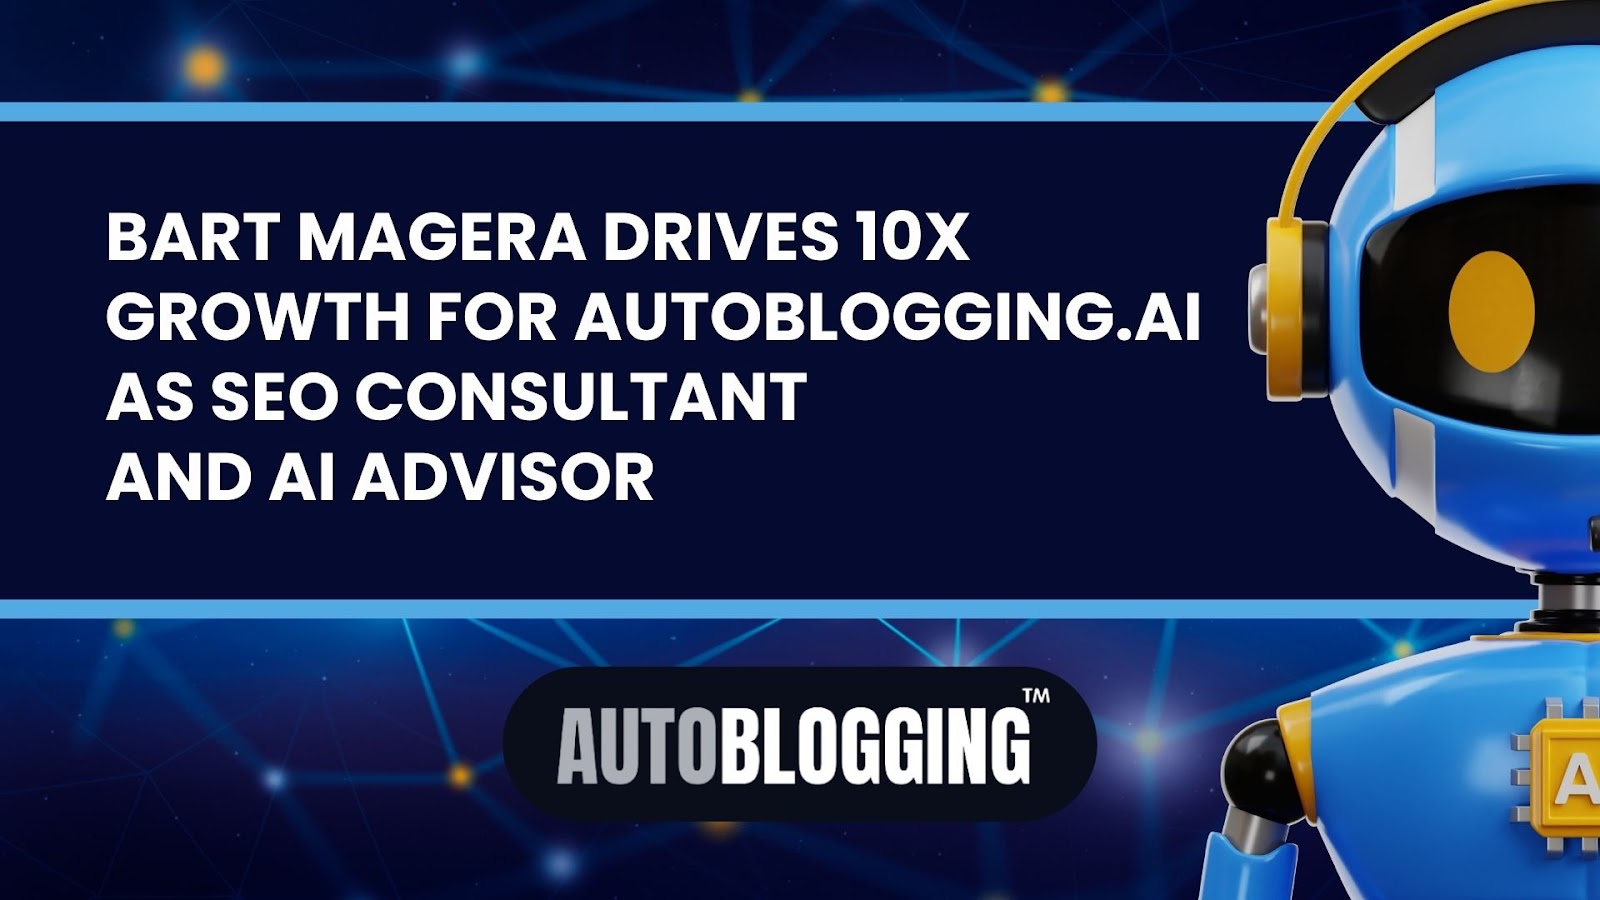 Bart Magera: The SEO Consultant and AI Advisor Behind 10x Growth of autoblogging.ai